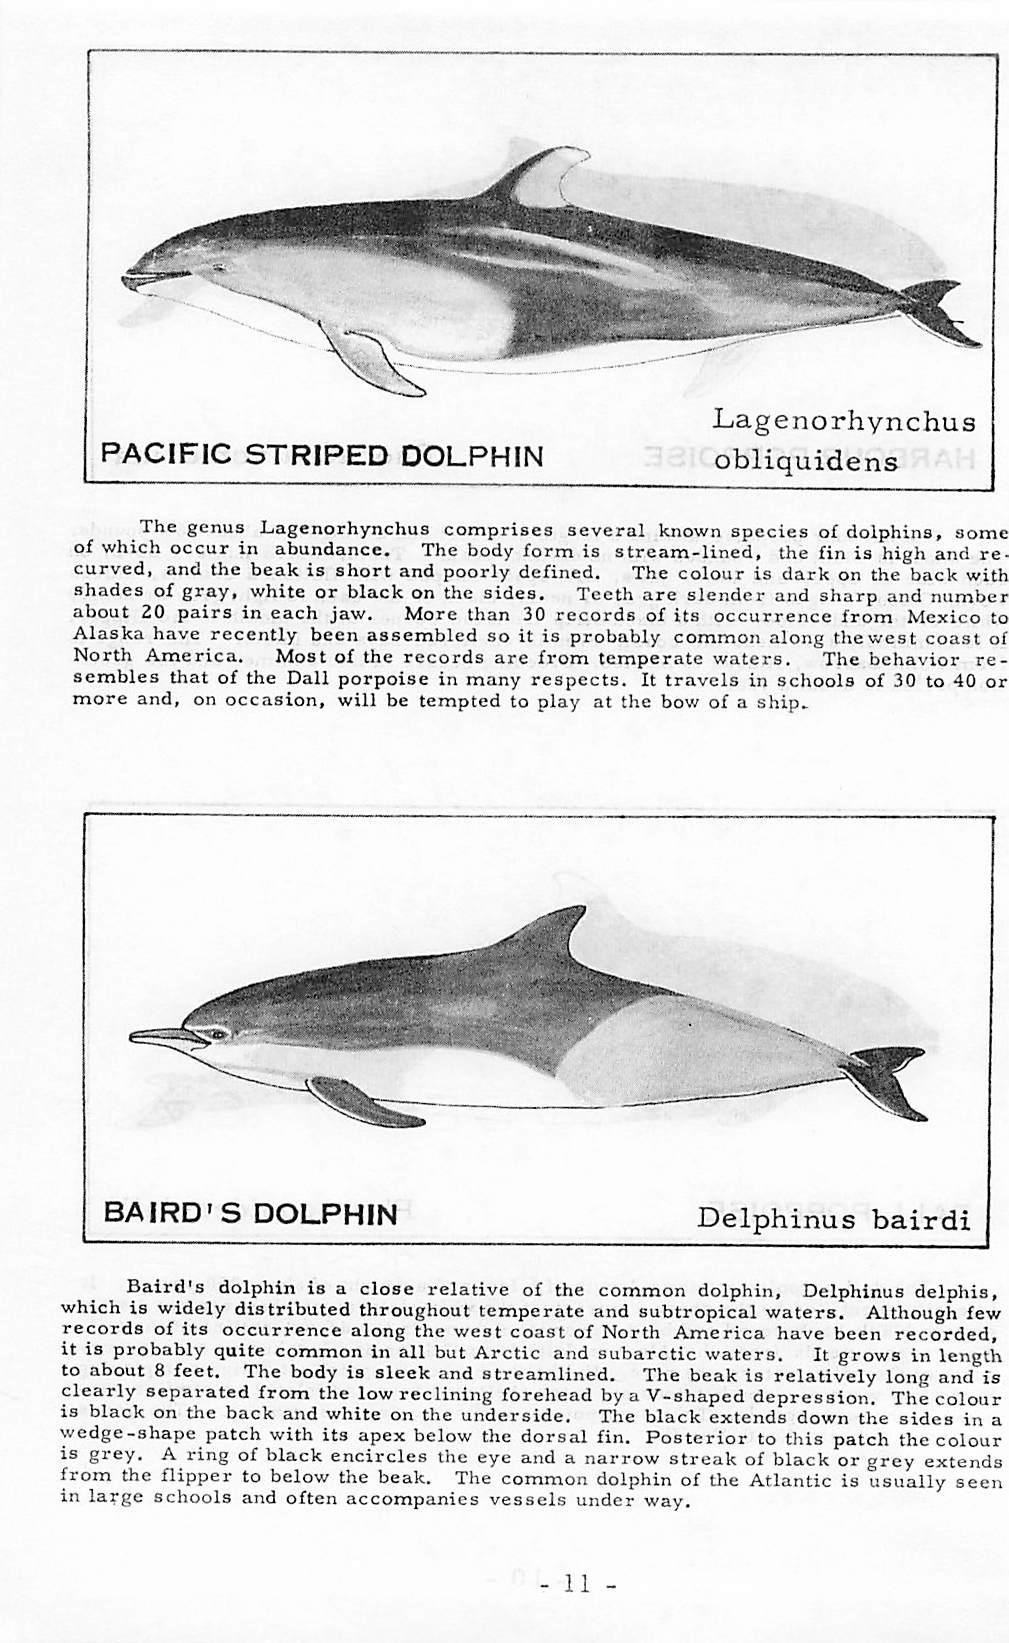 PACIFIC STRIPED DOLPHIN L-agenorhynchus obliquidens The genus Lagenorhynchus comprises several known species of dolphins, some of which occur in abundance.